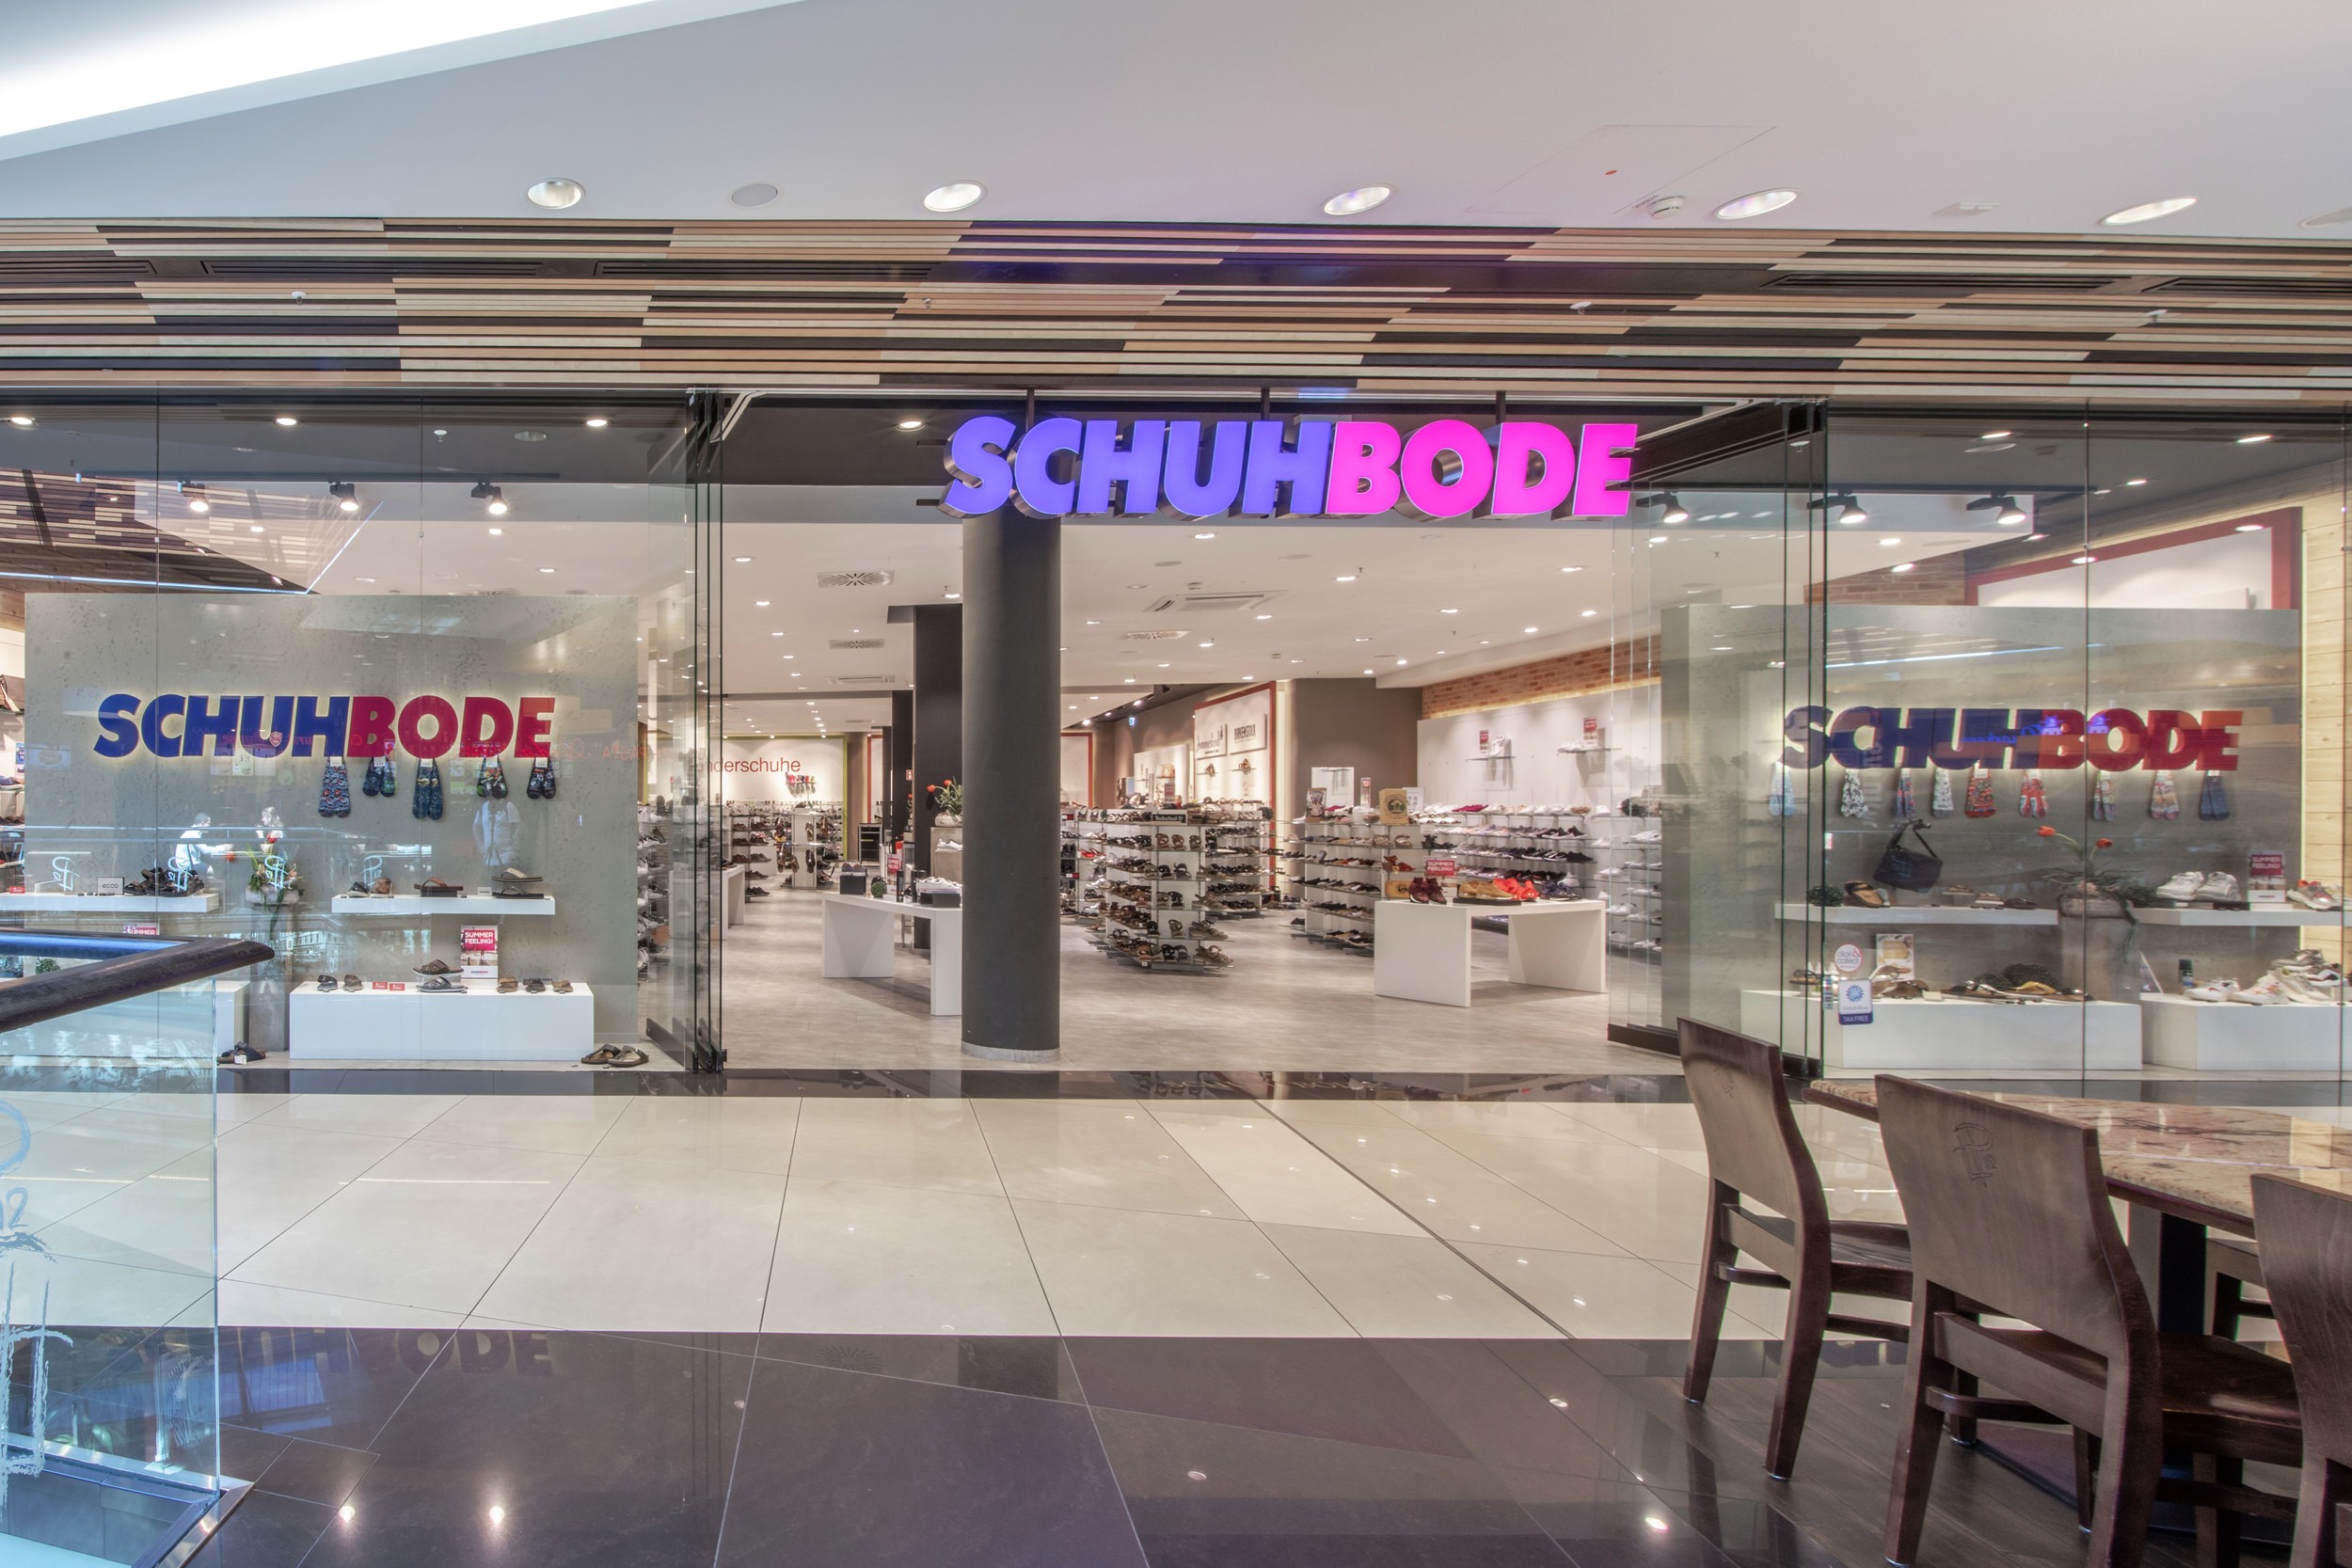 Schuh Bode at the Mall of Berlin